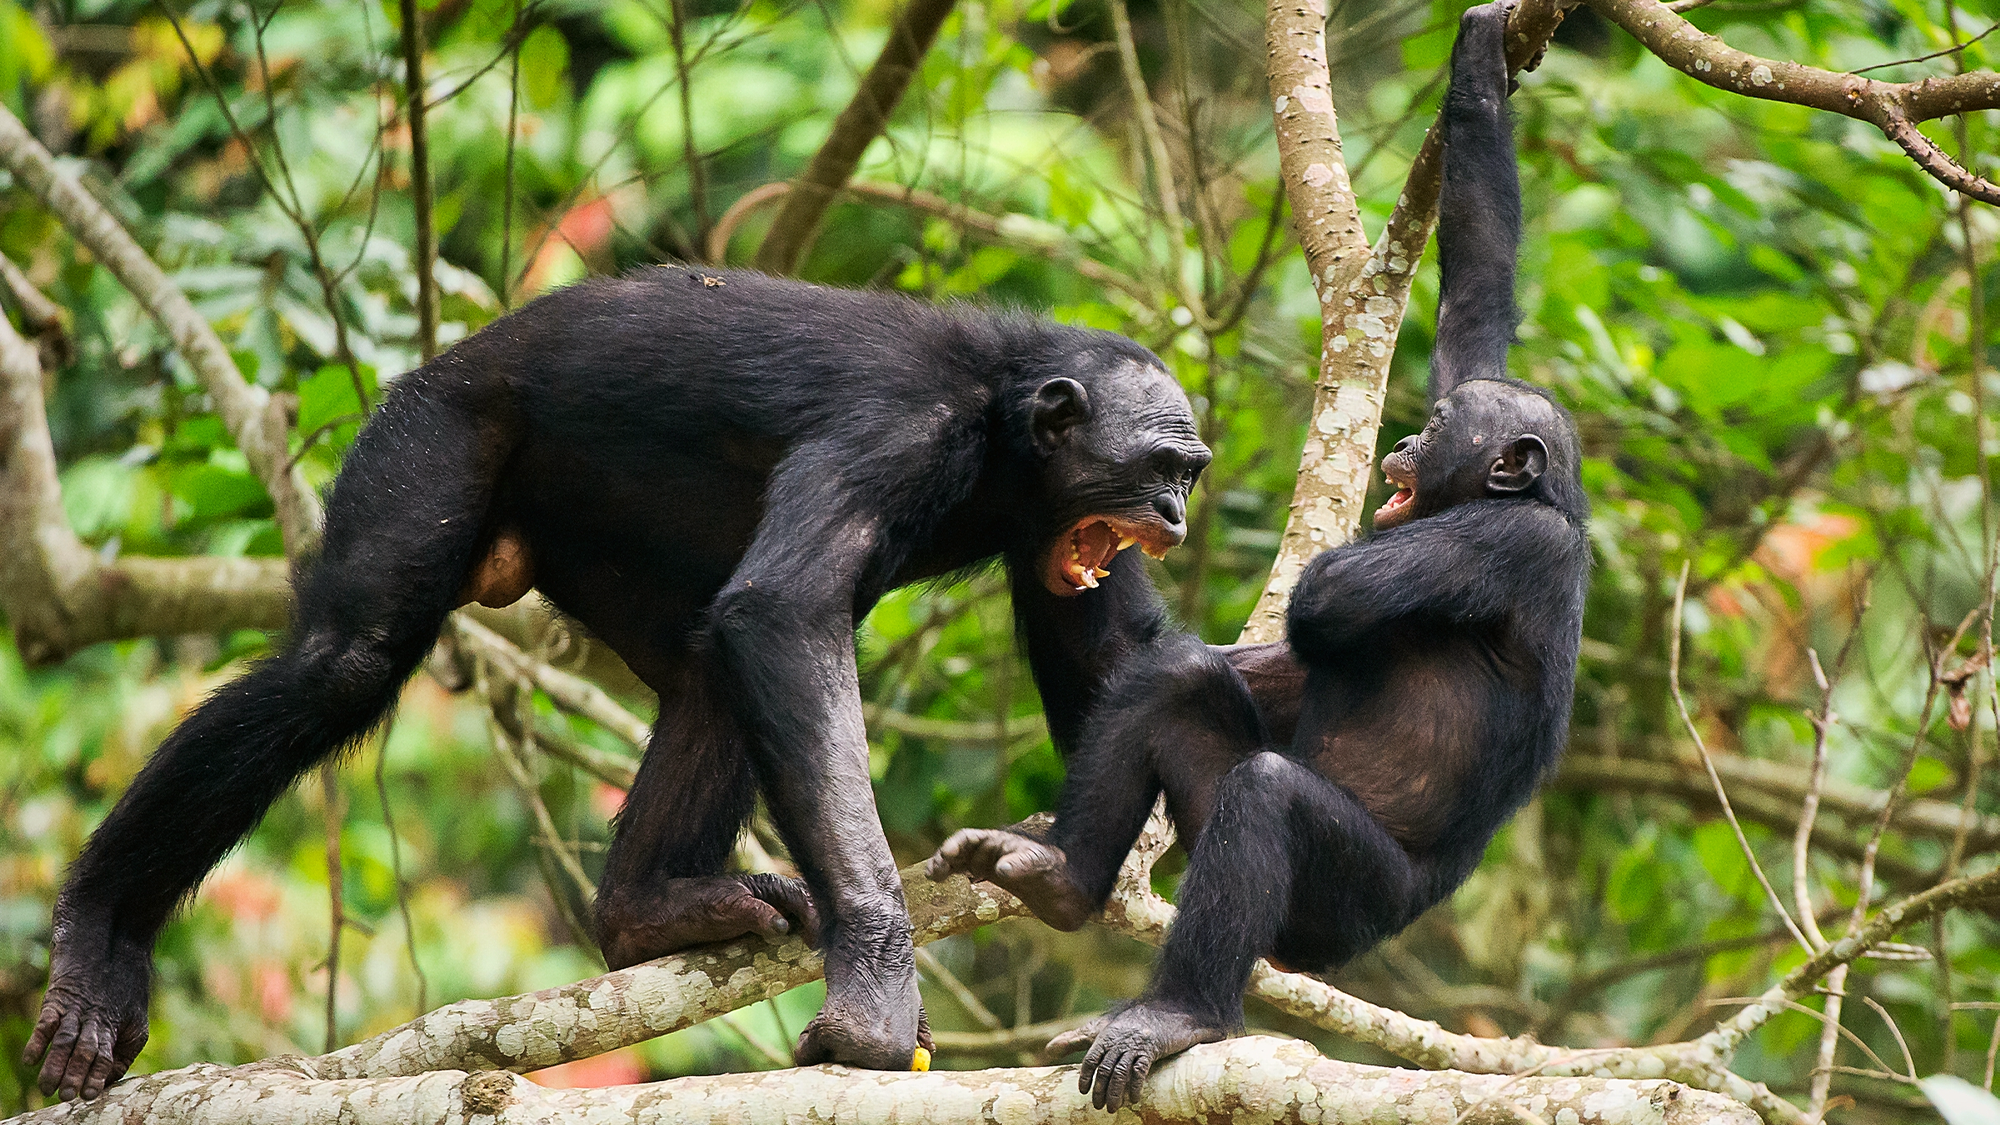 one bonobo yells at another bonobo in a tree